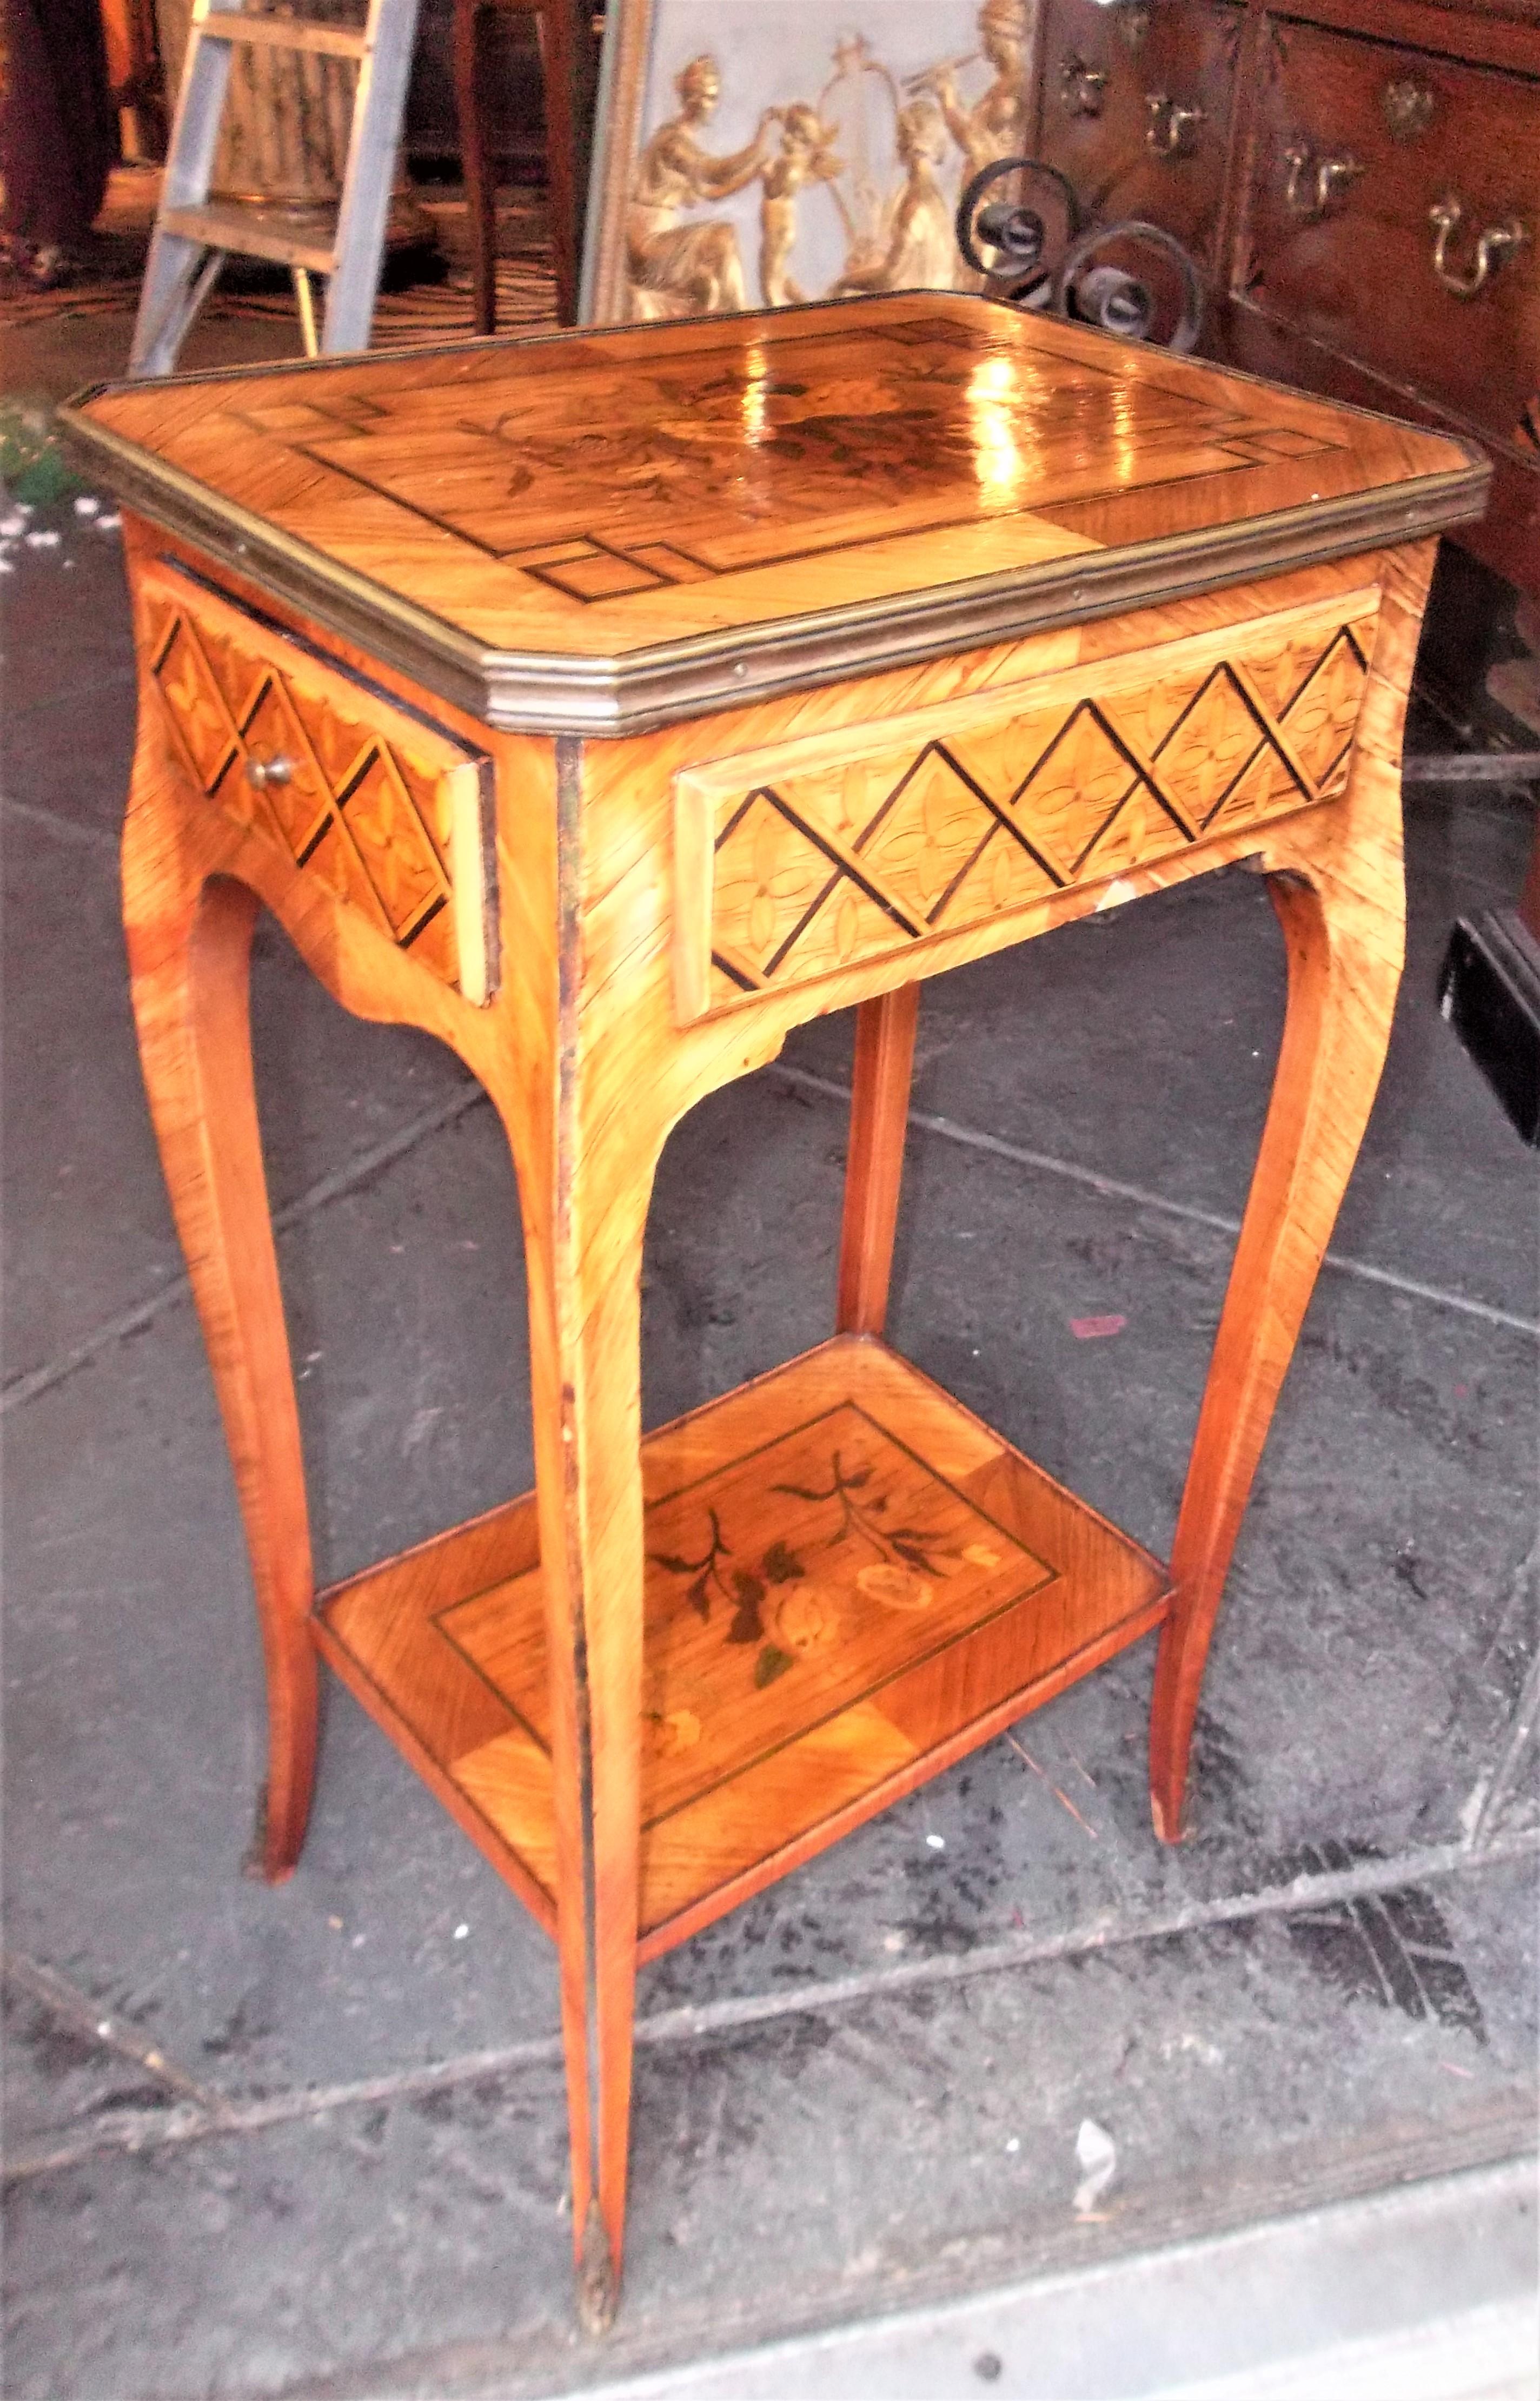 Louis XV Transitional to Louis XVI Style Marquetry Table 2